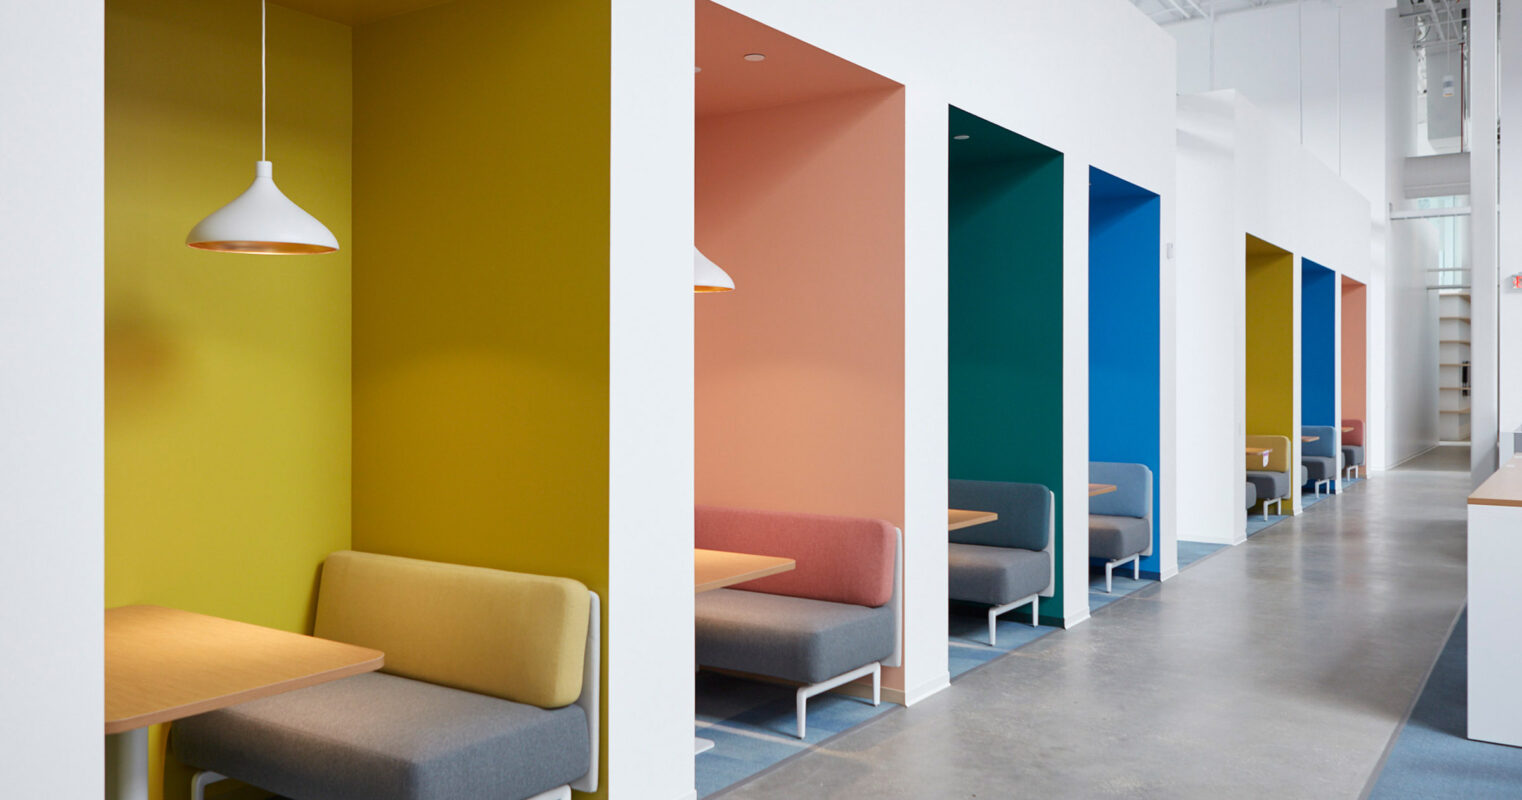 Minimalist waiting area with a vibrant color scheme, featuring a succession of recessed seating nooks in yellow, orange, teal, and blue, each accented with a sleek pendant light and simple bench seating.